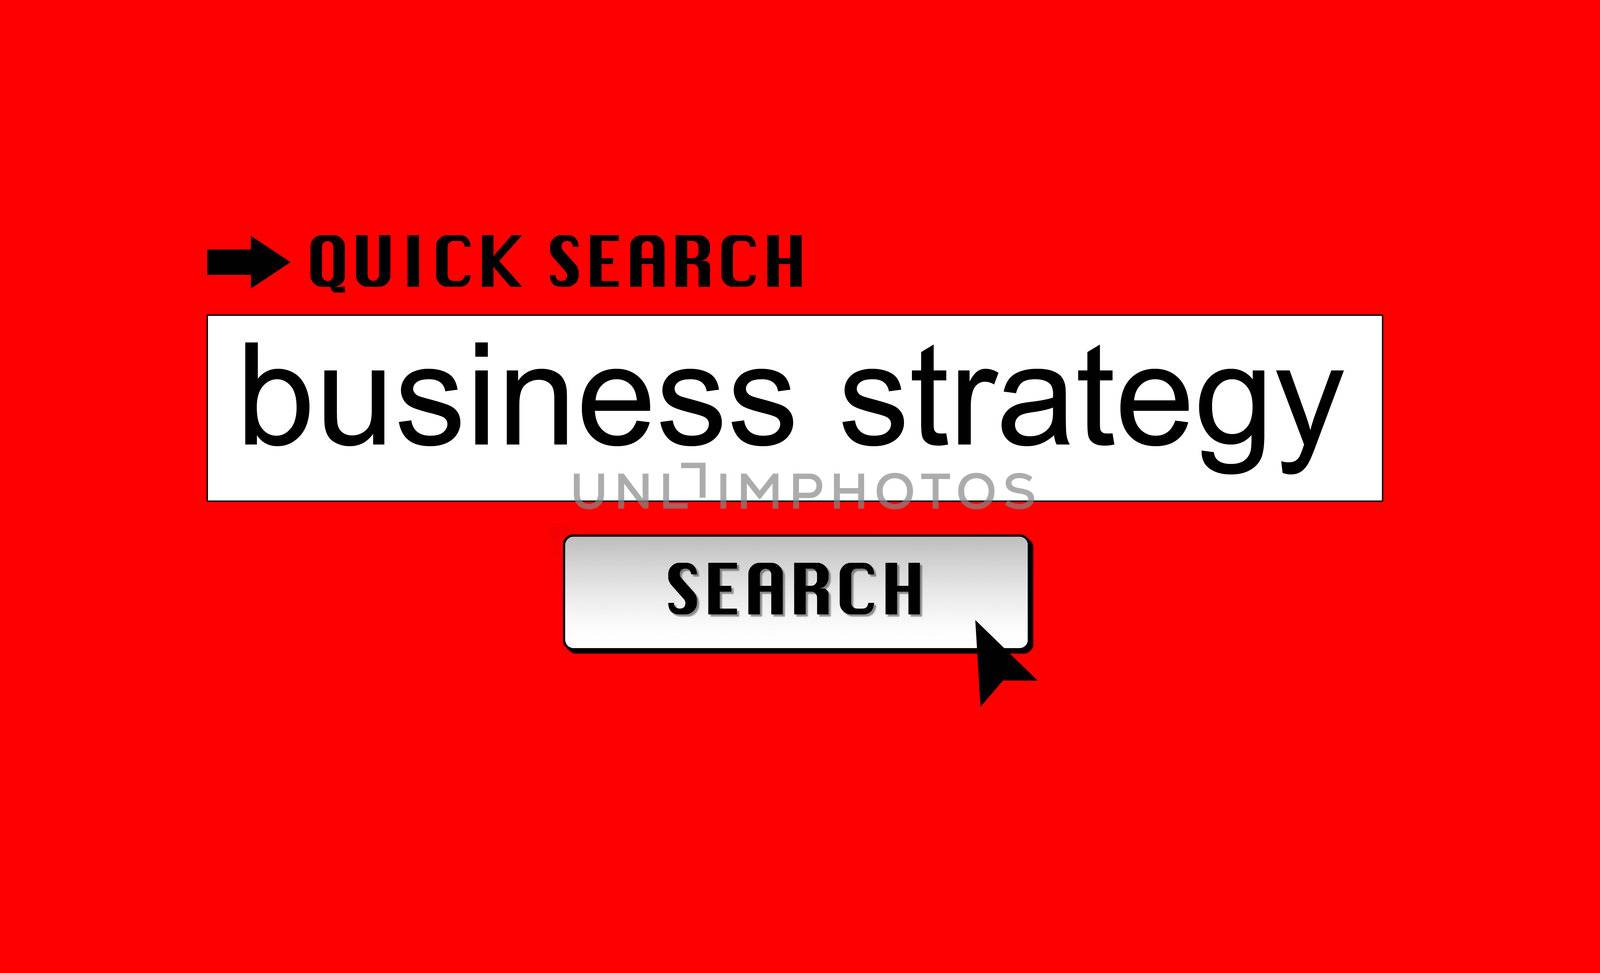 Searching for 'business strategy' in an internet search engine.